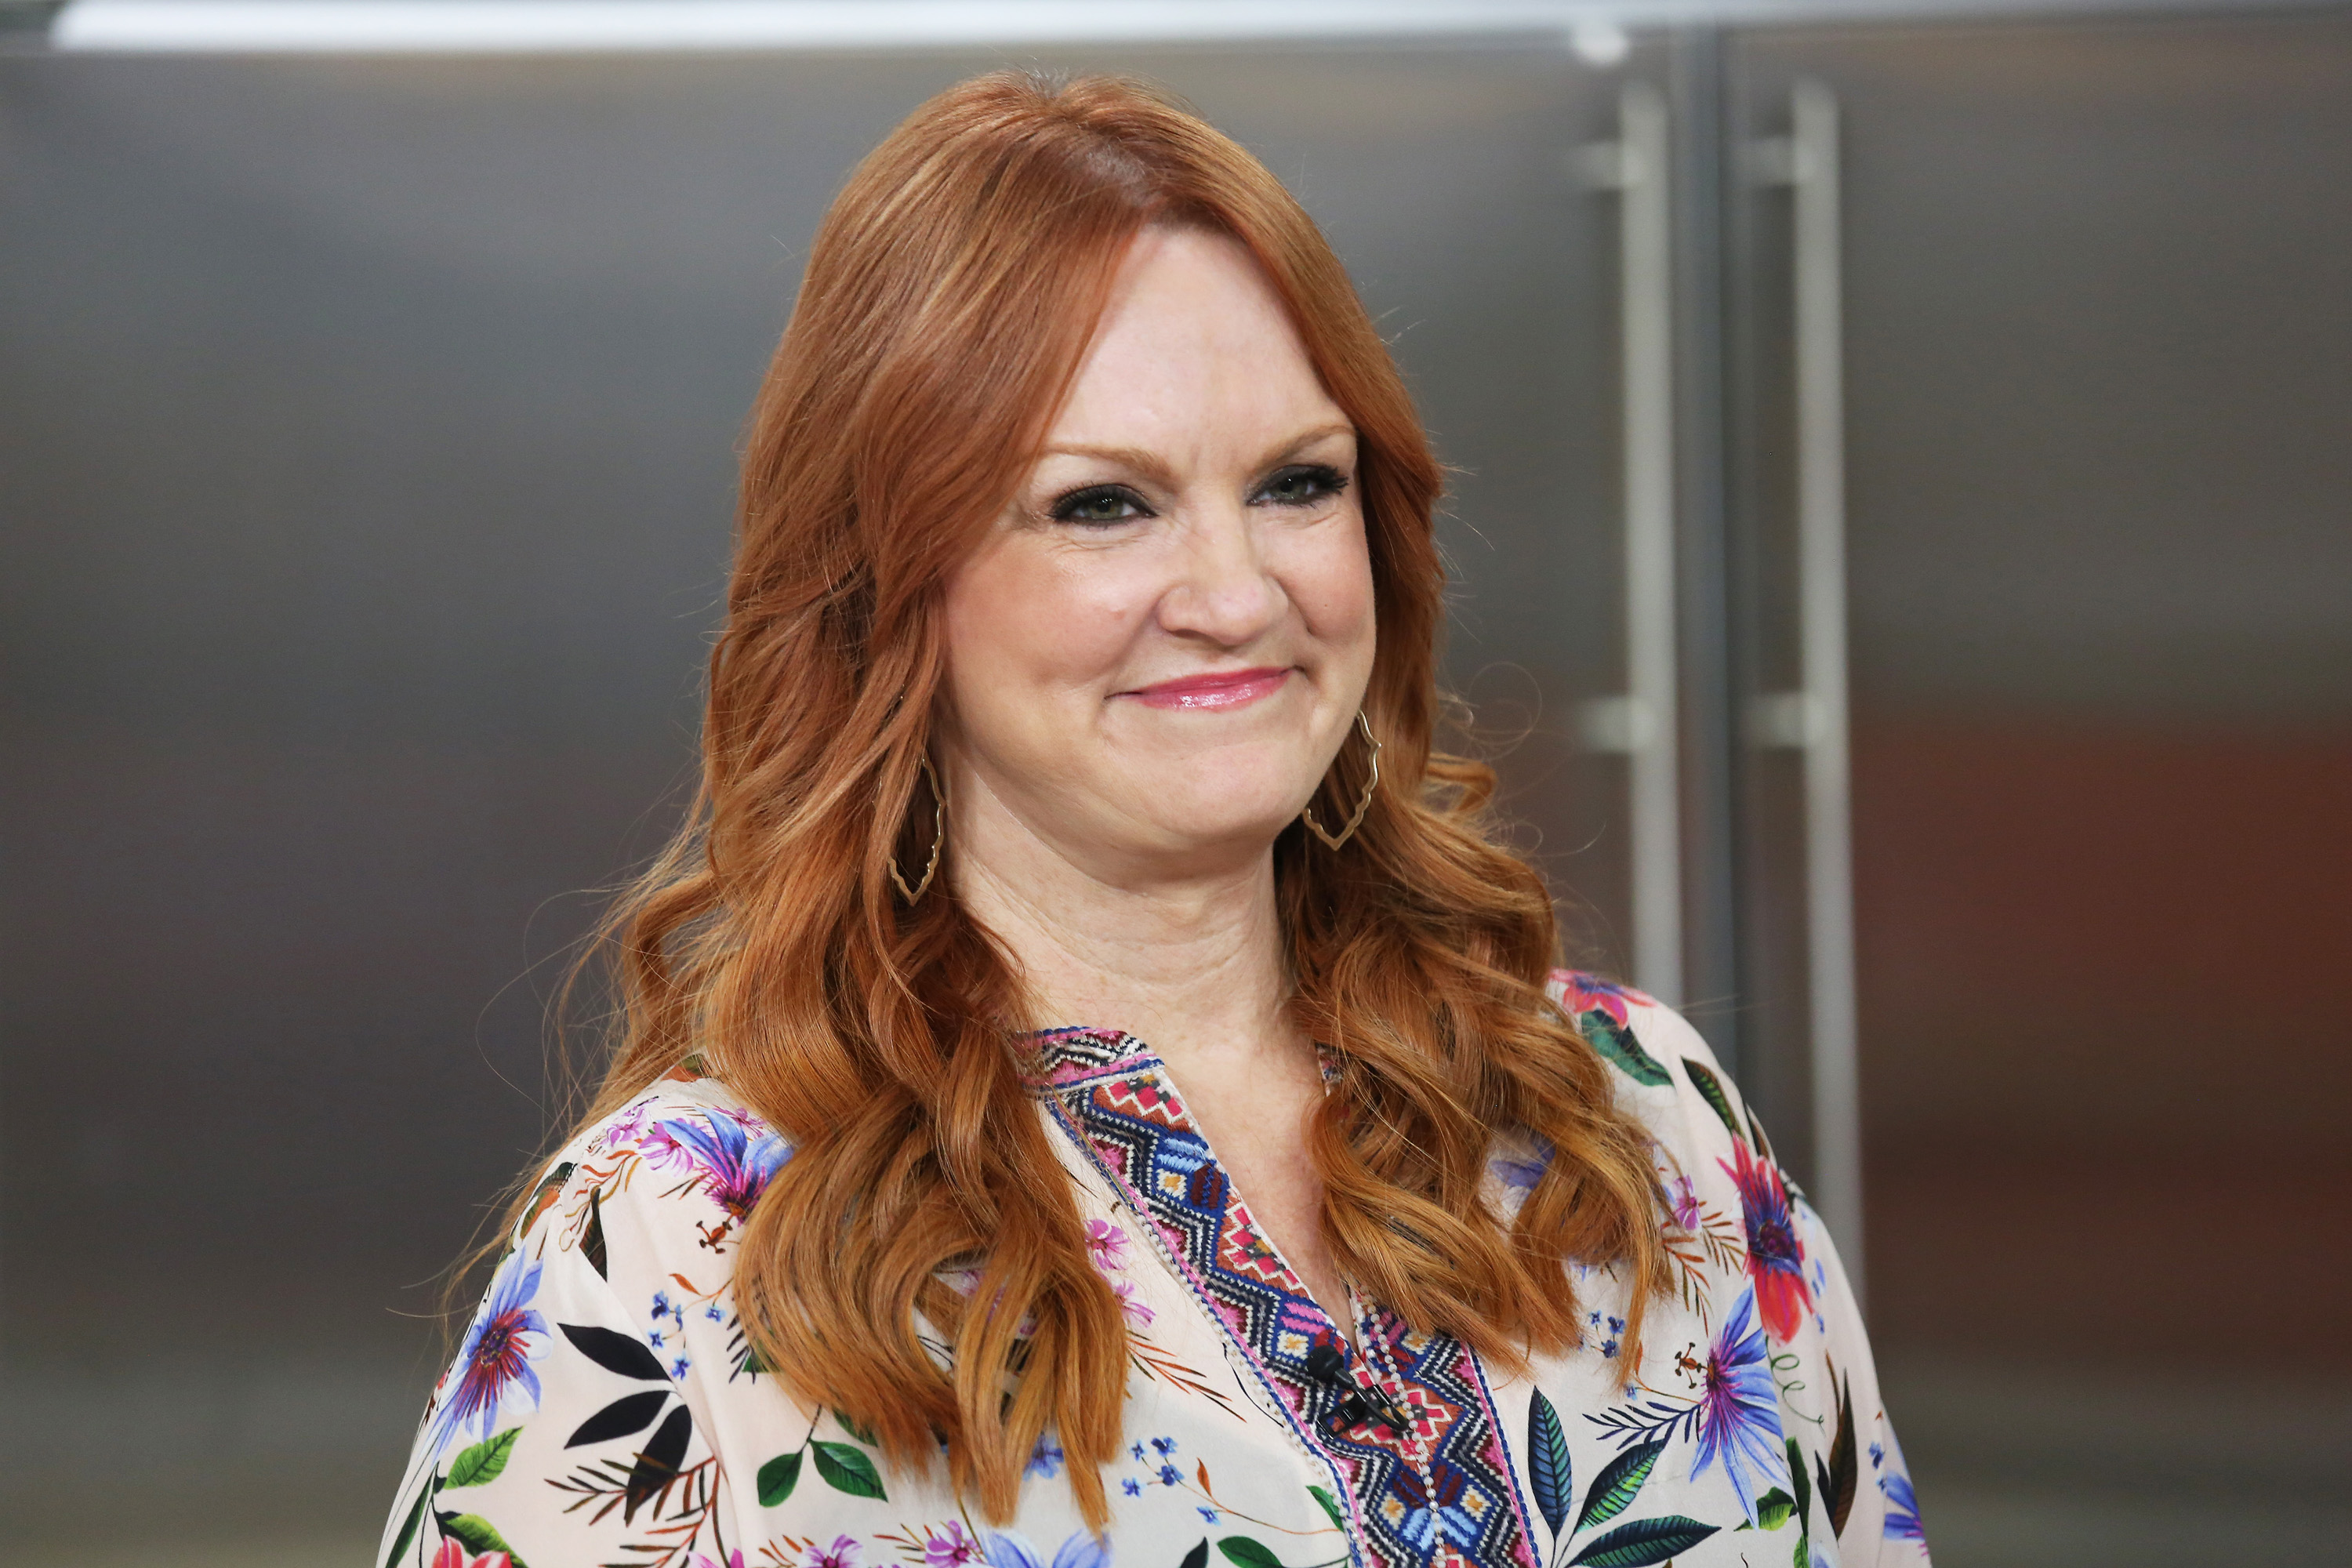 Ree Drummond does a cooking demonstration on the Today show.